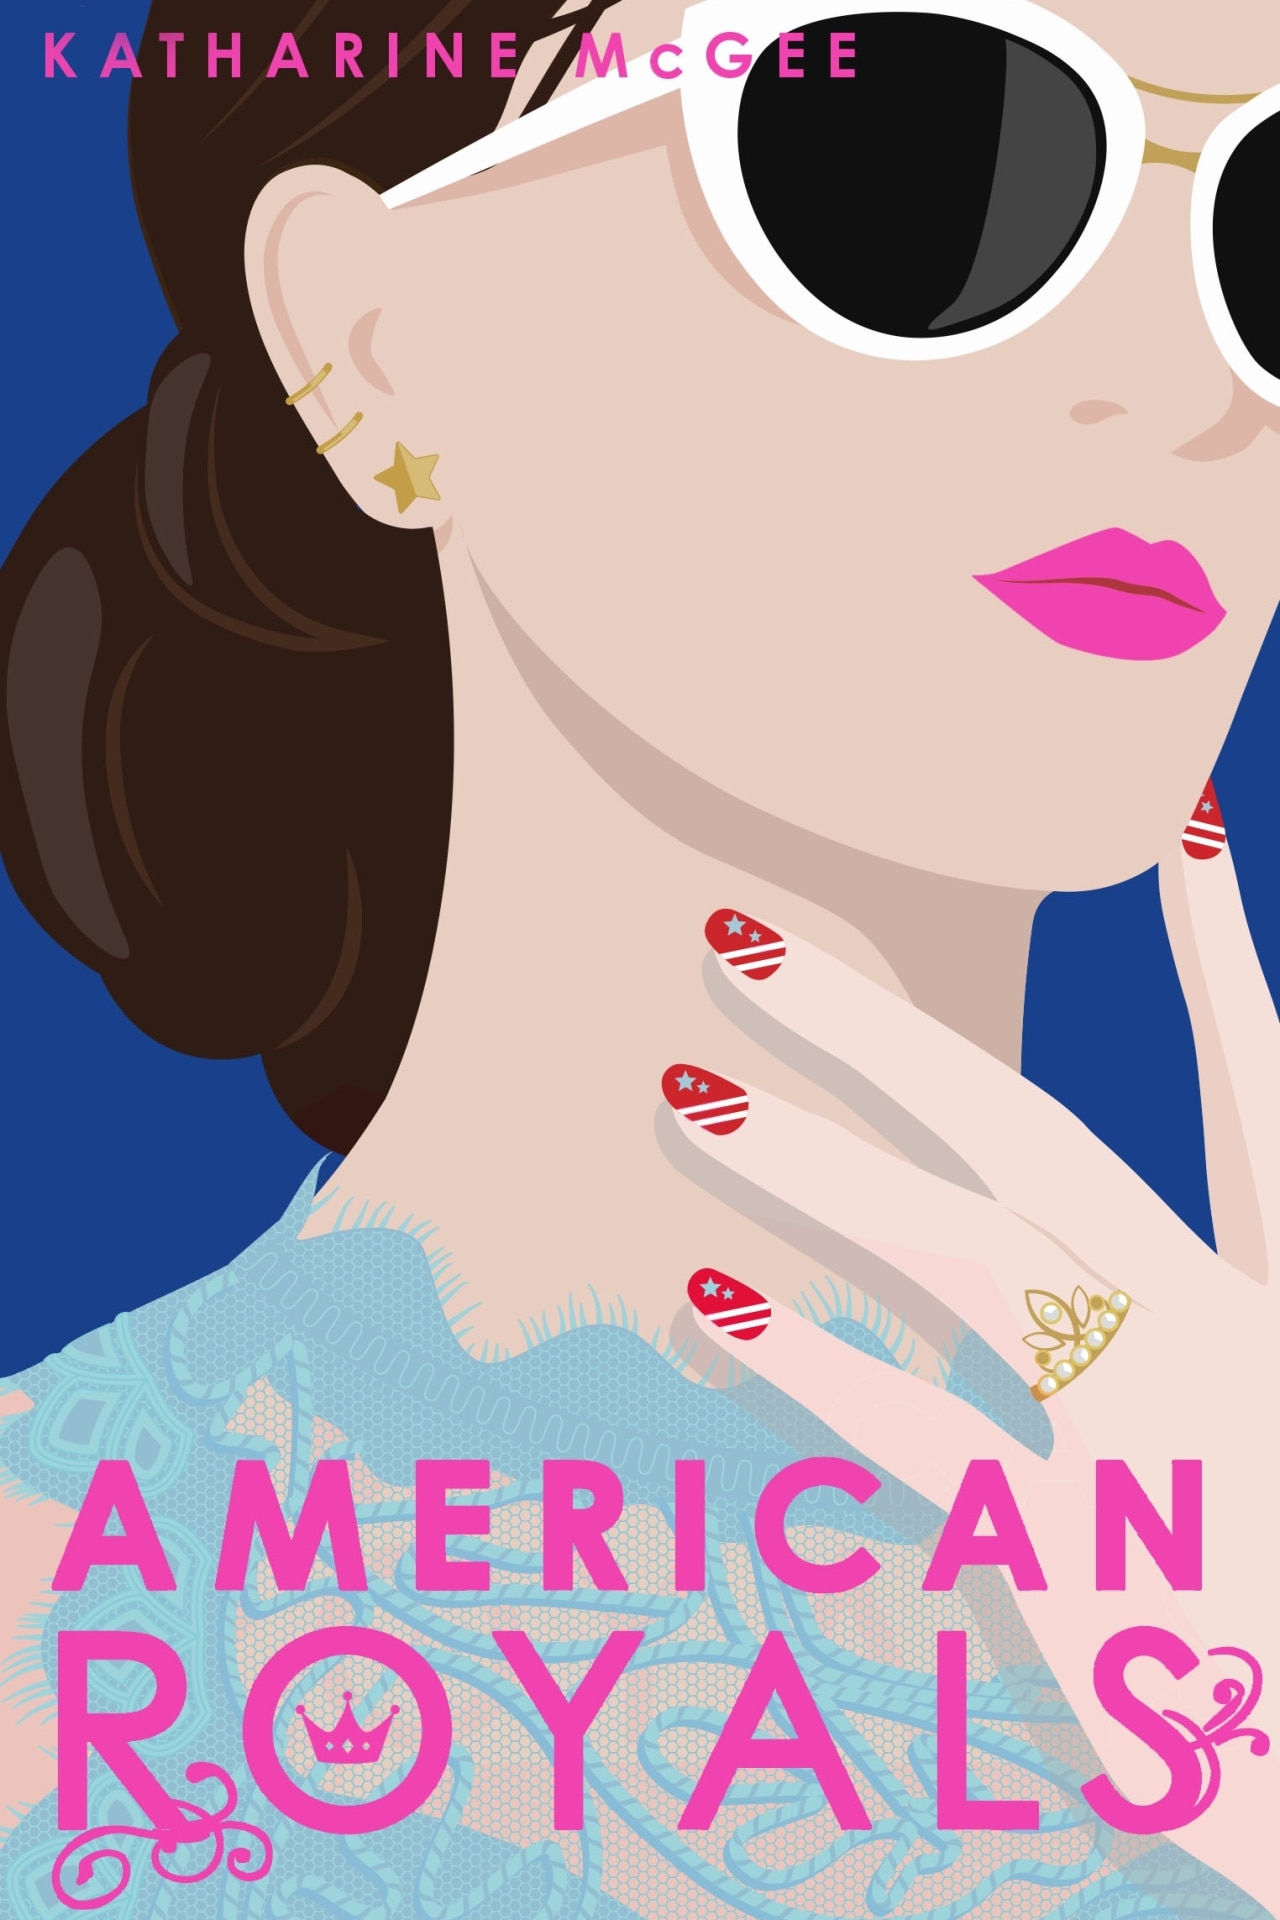 American Royals is the Gossip Girl-meets-The Princess Diaries novel set to ignite your next book club